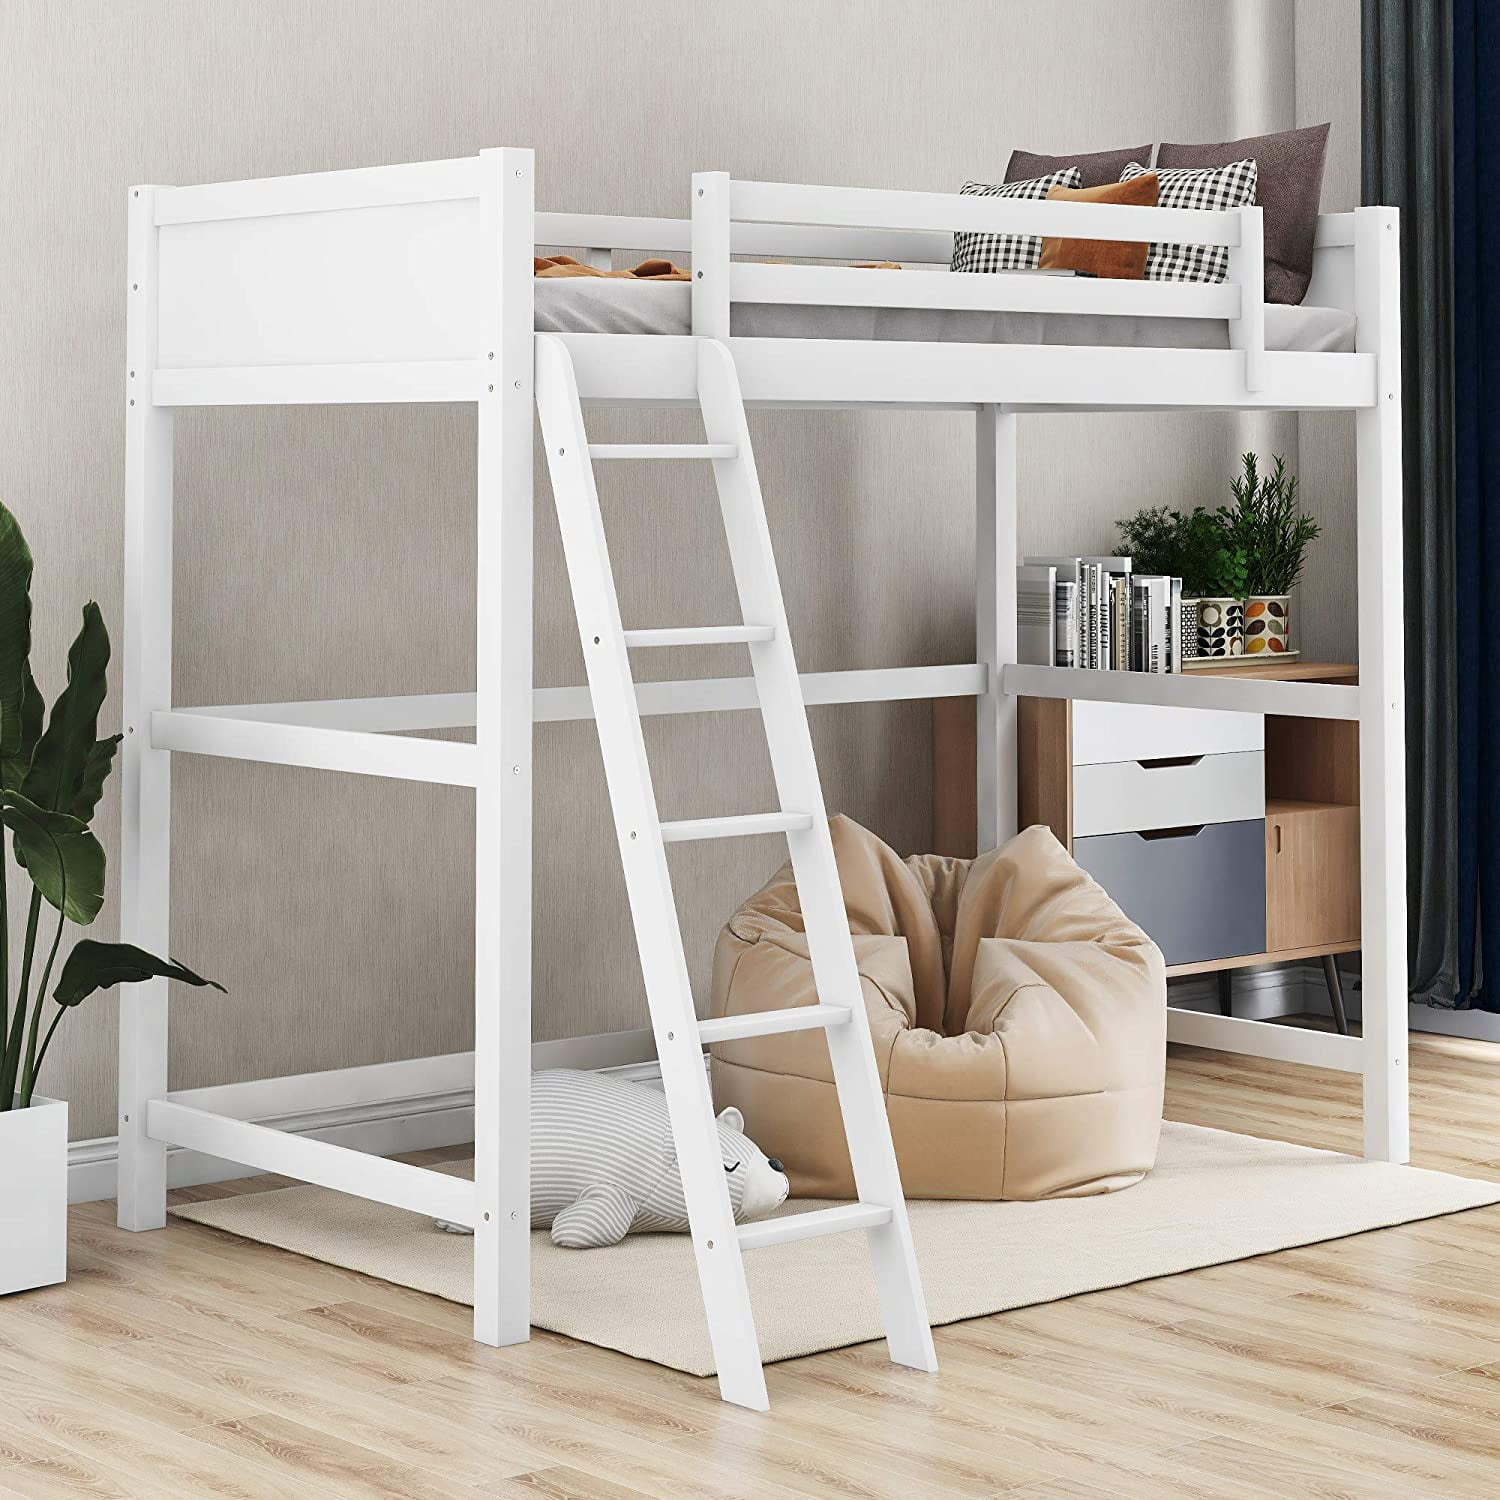 Modernluxe Panel Style Solid Wood Loft, Angled Bunk Bed Ladder Hooks